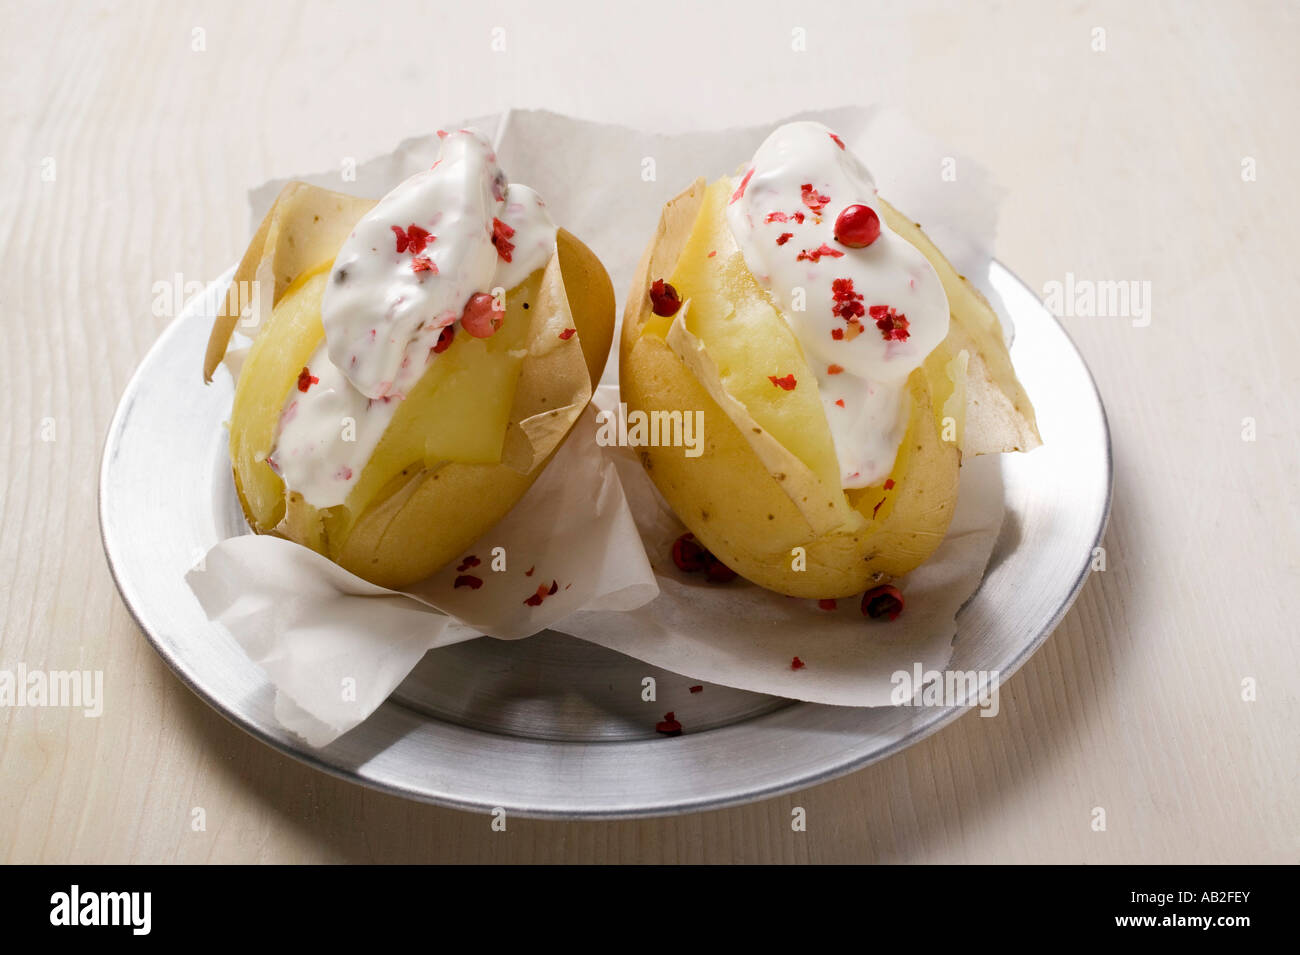 Potatoes cooked in their skins with sour cream red pepper FoodCollection Stock Photo